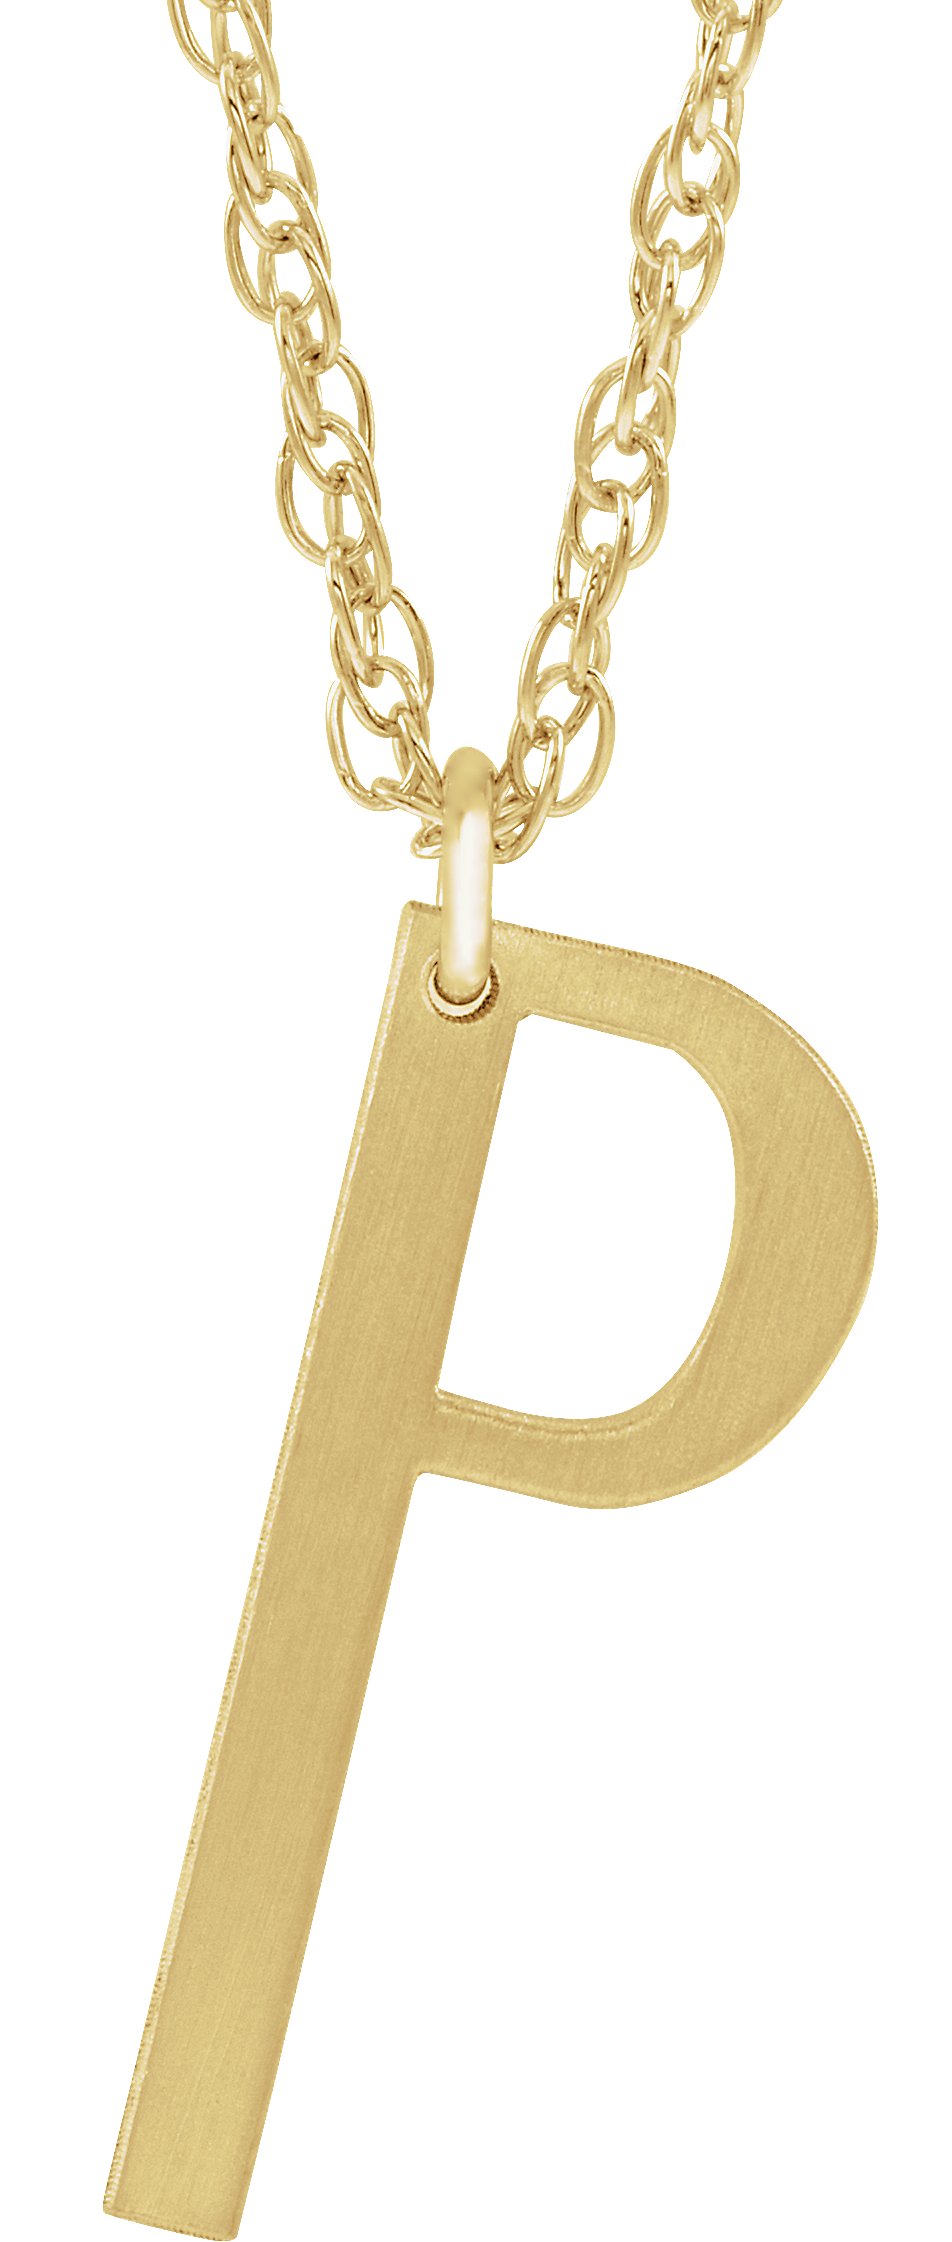 14K Yellow Gold-Plated Sterling Silver Block Initial P 16-18" Necklace with Brush Finish